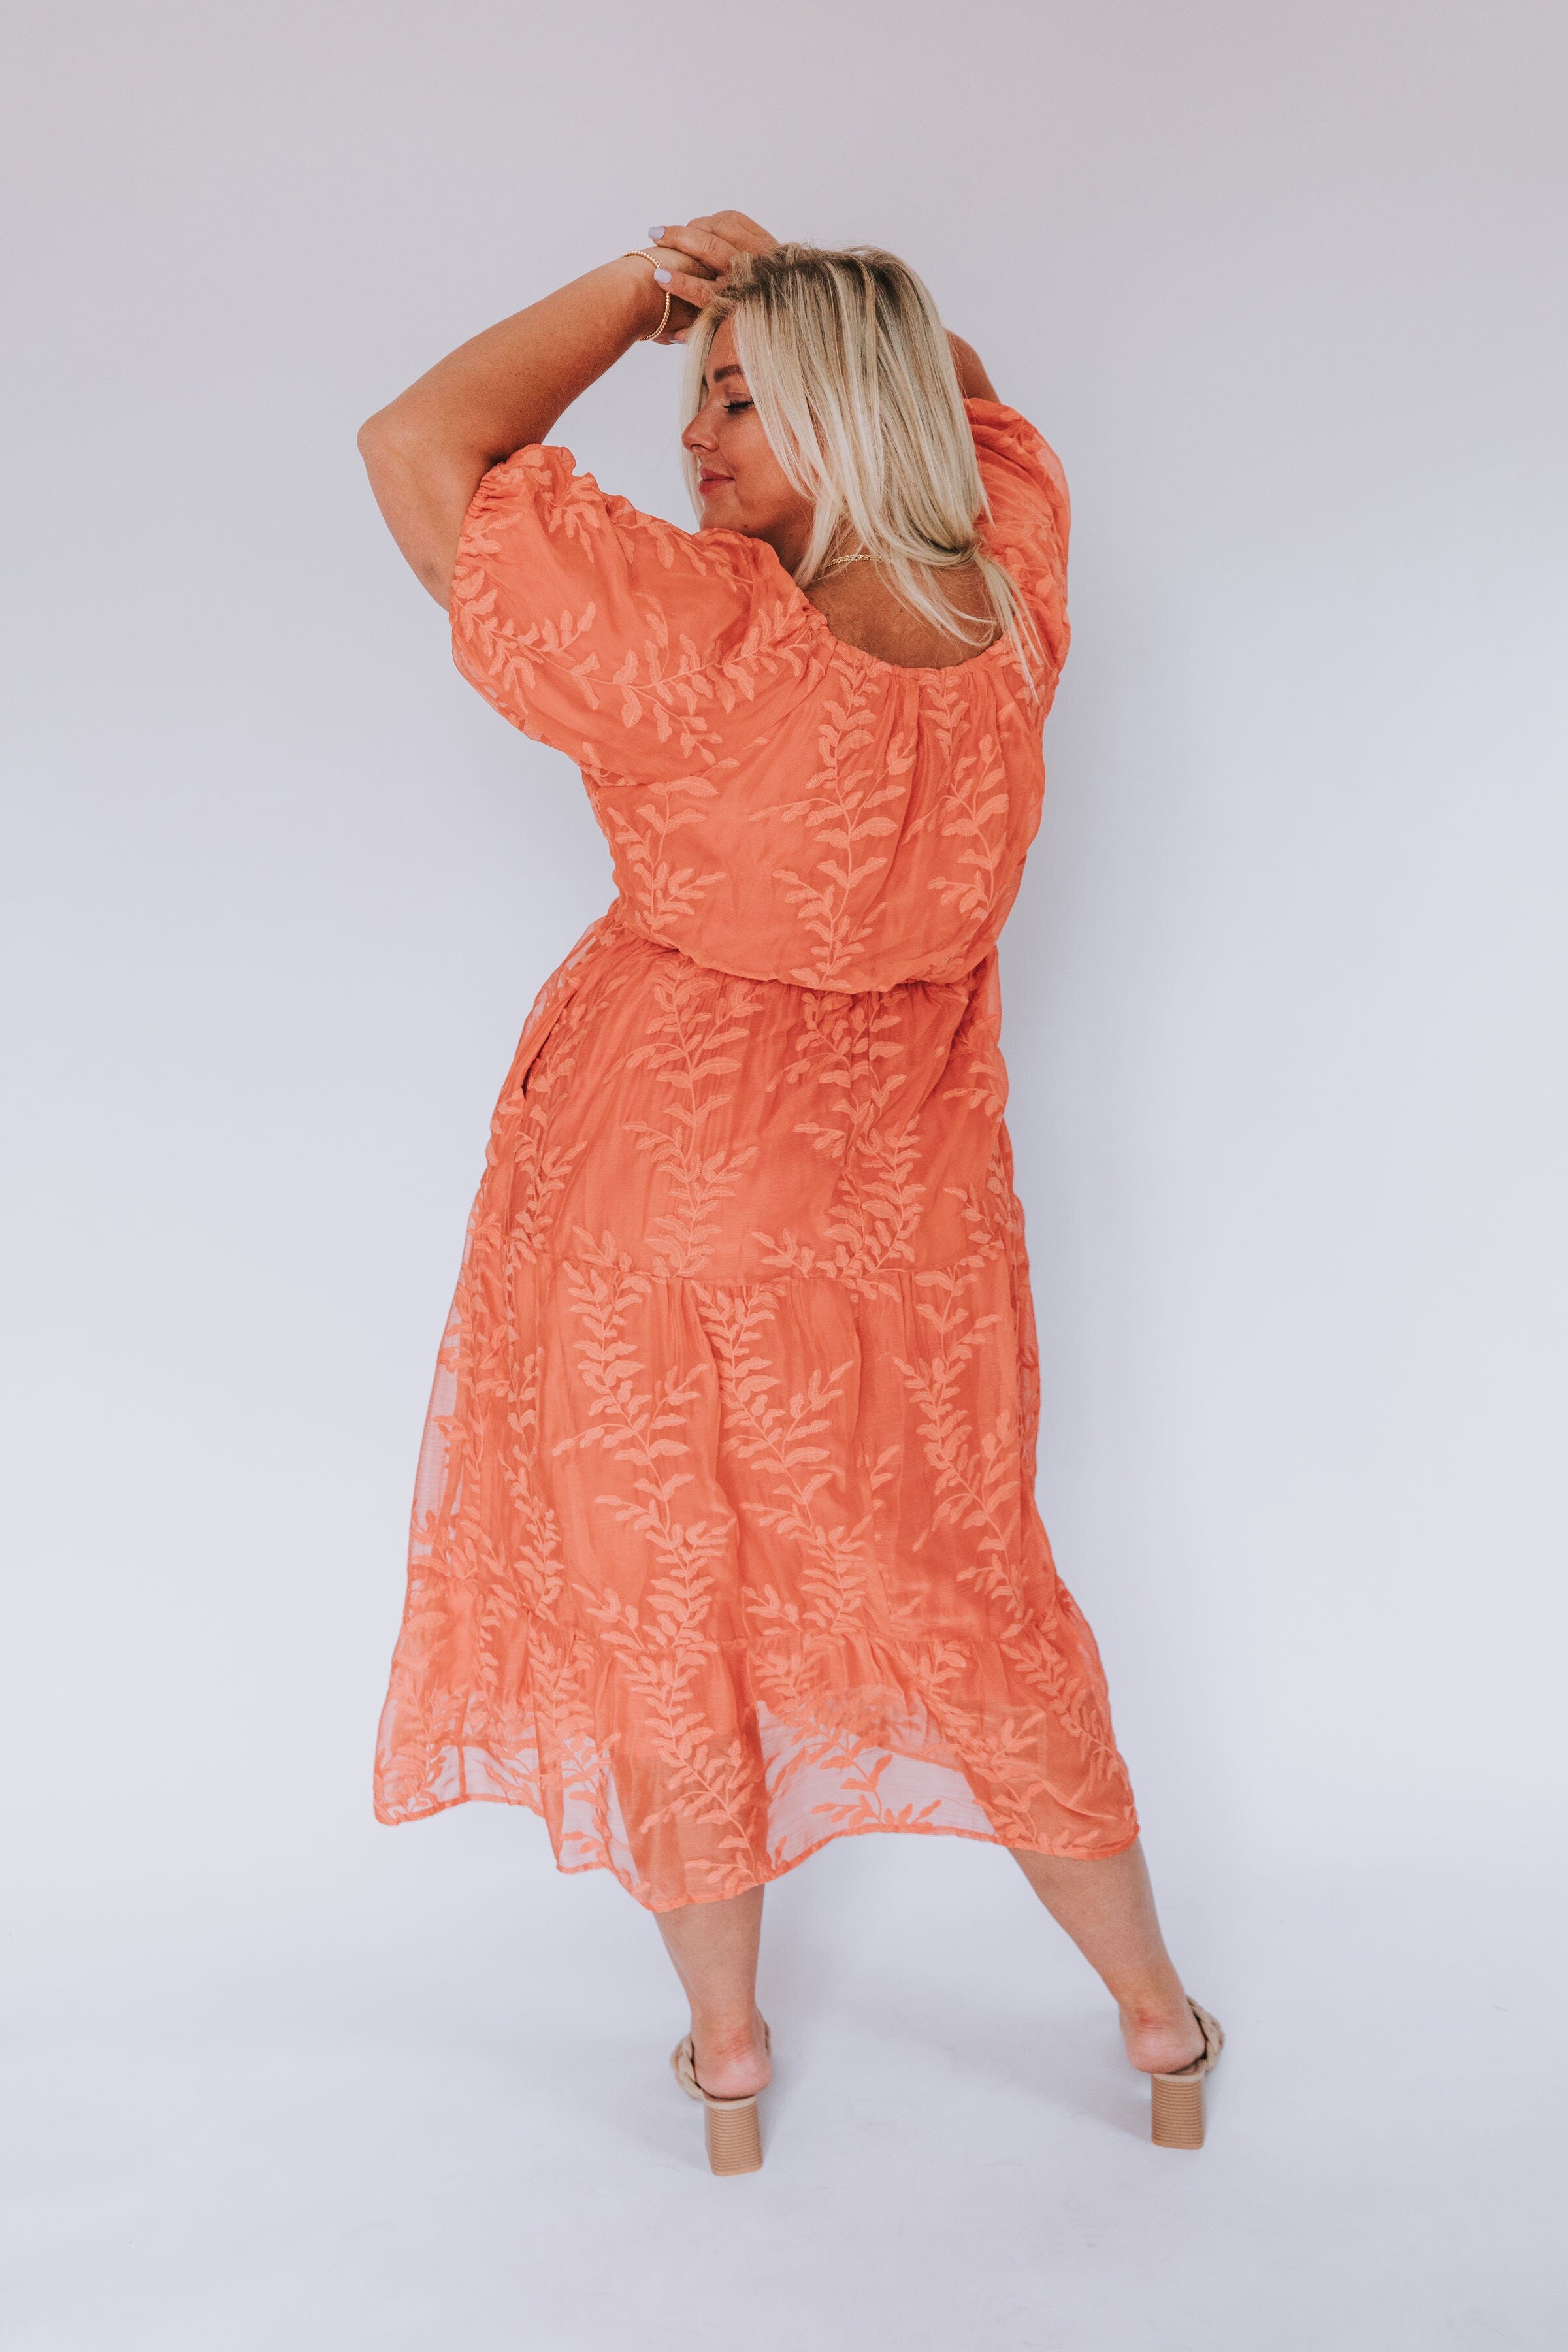 PLUS SIZE - Life In Color Dress 